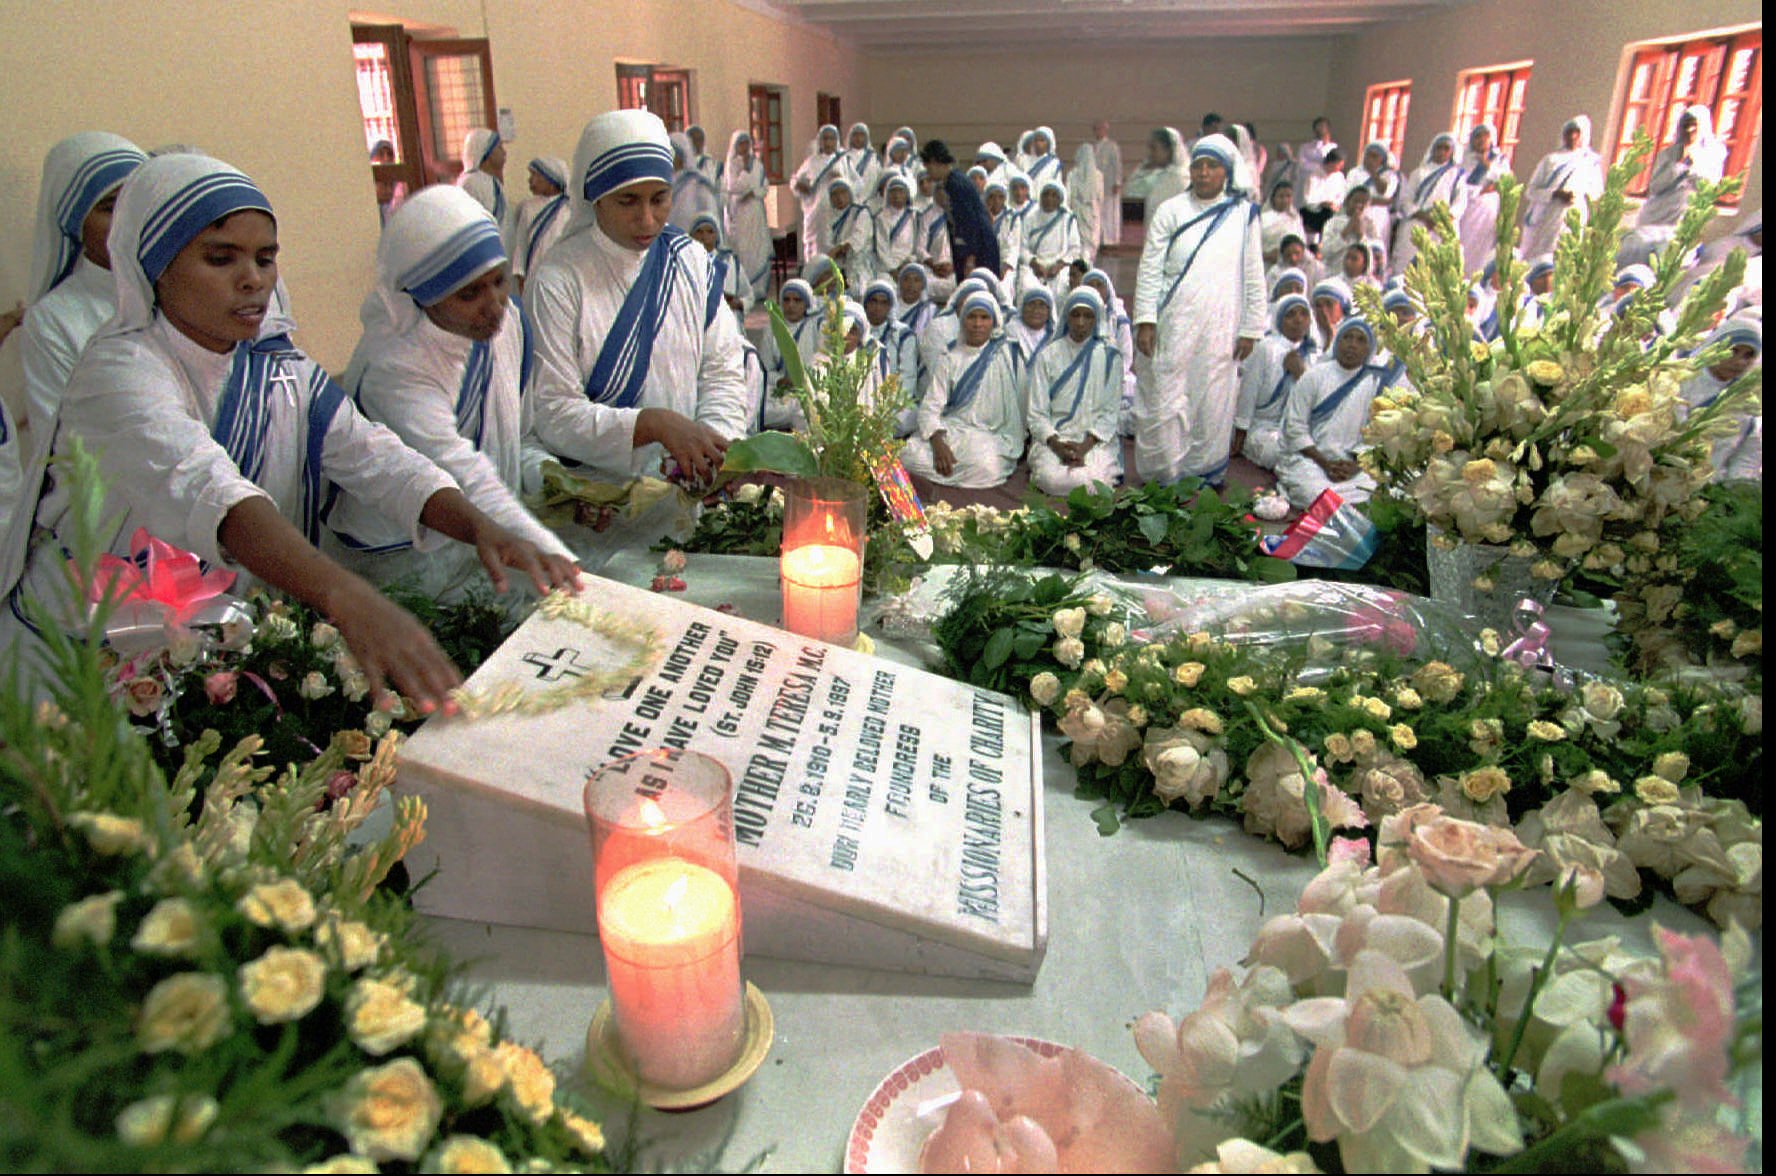 Sisters of the Missionaries of Charity decorate the tomb of Mother Teresa, who was buried after a state funeral, at Mother House in Calcutta, India, on Sept. 14, 1997.